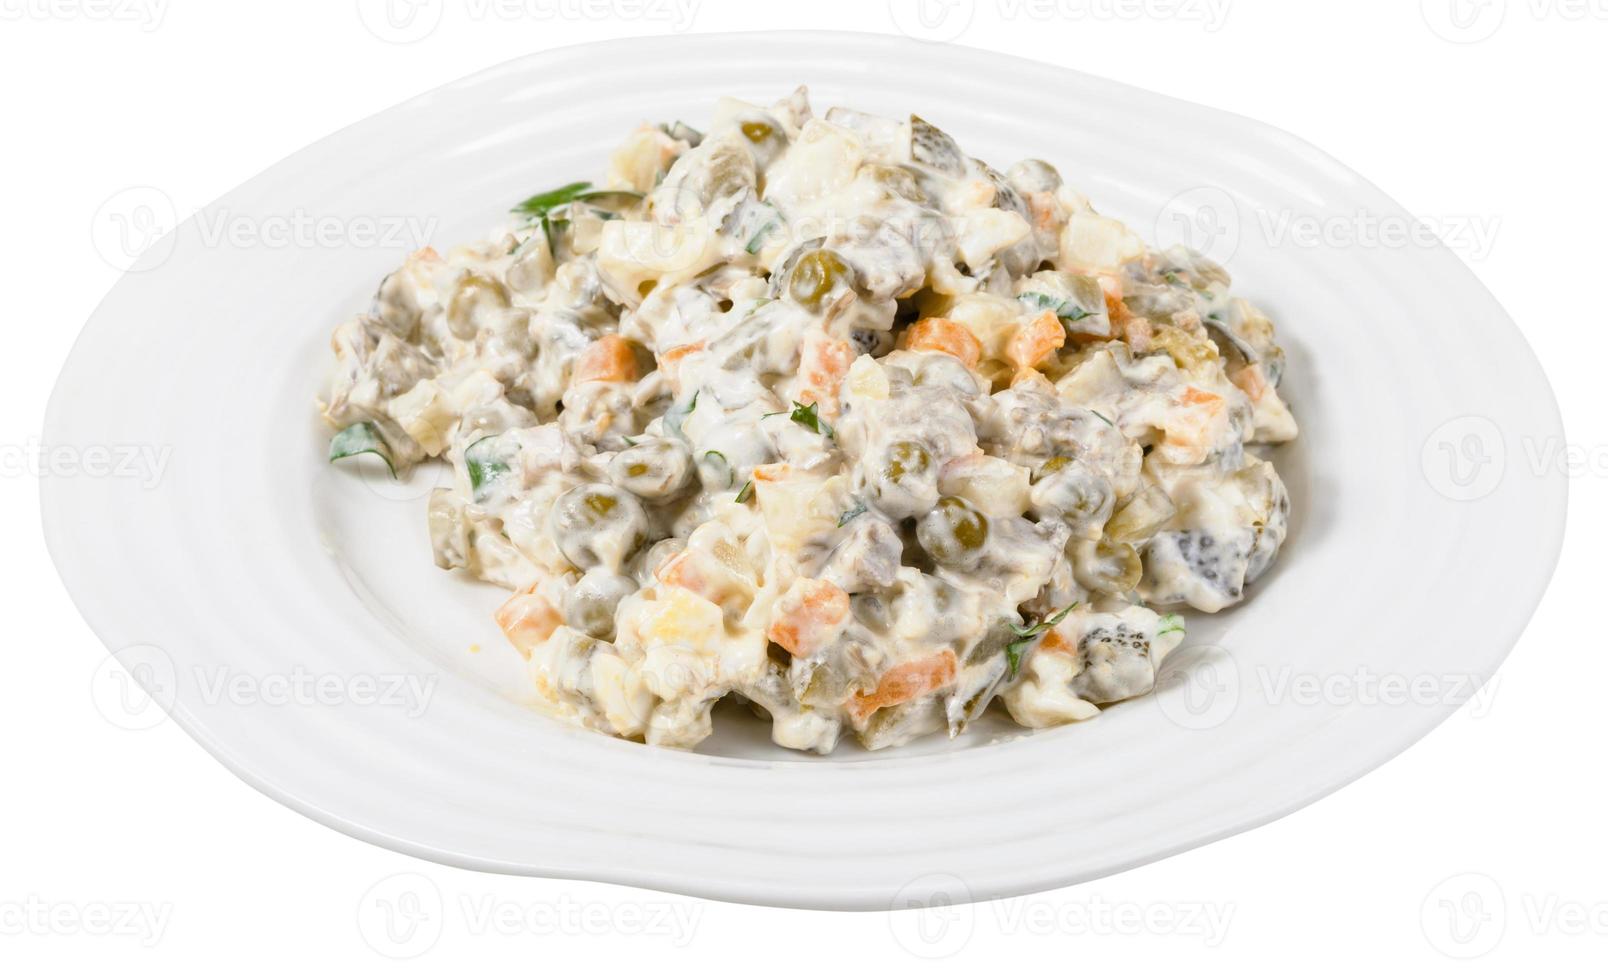 russian salad with mayonnaise on plate isolated photo